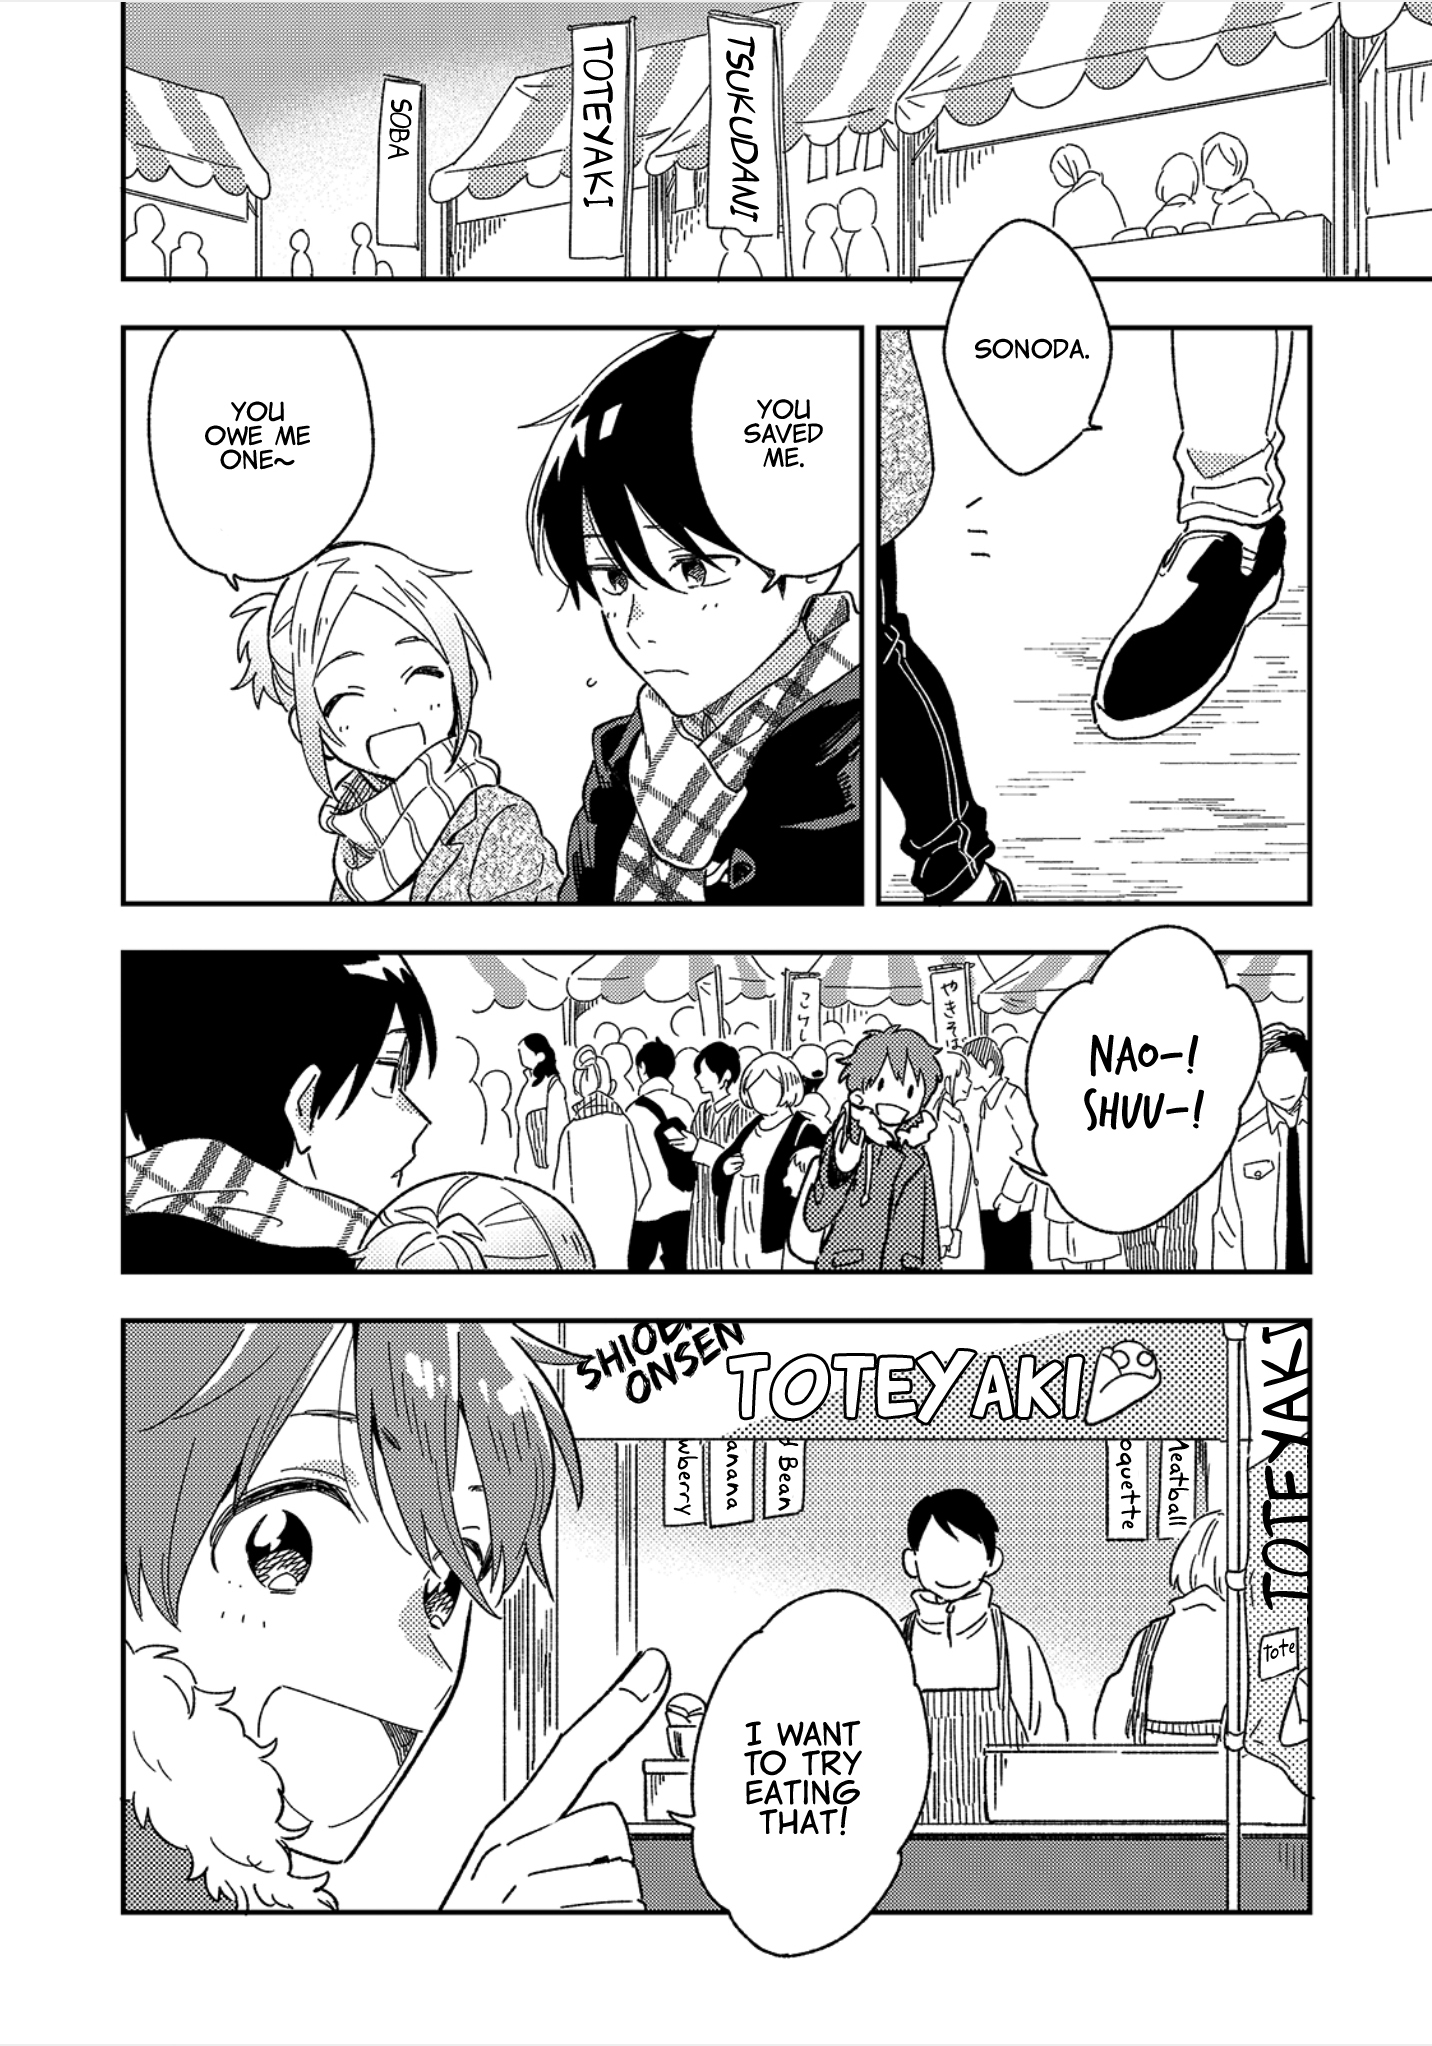 The Male High School Students Are Hungry Again Today vol.1 ch.7